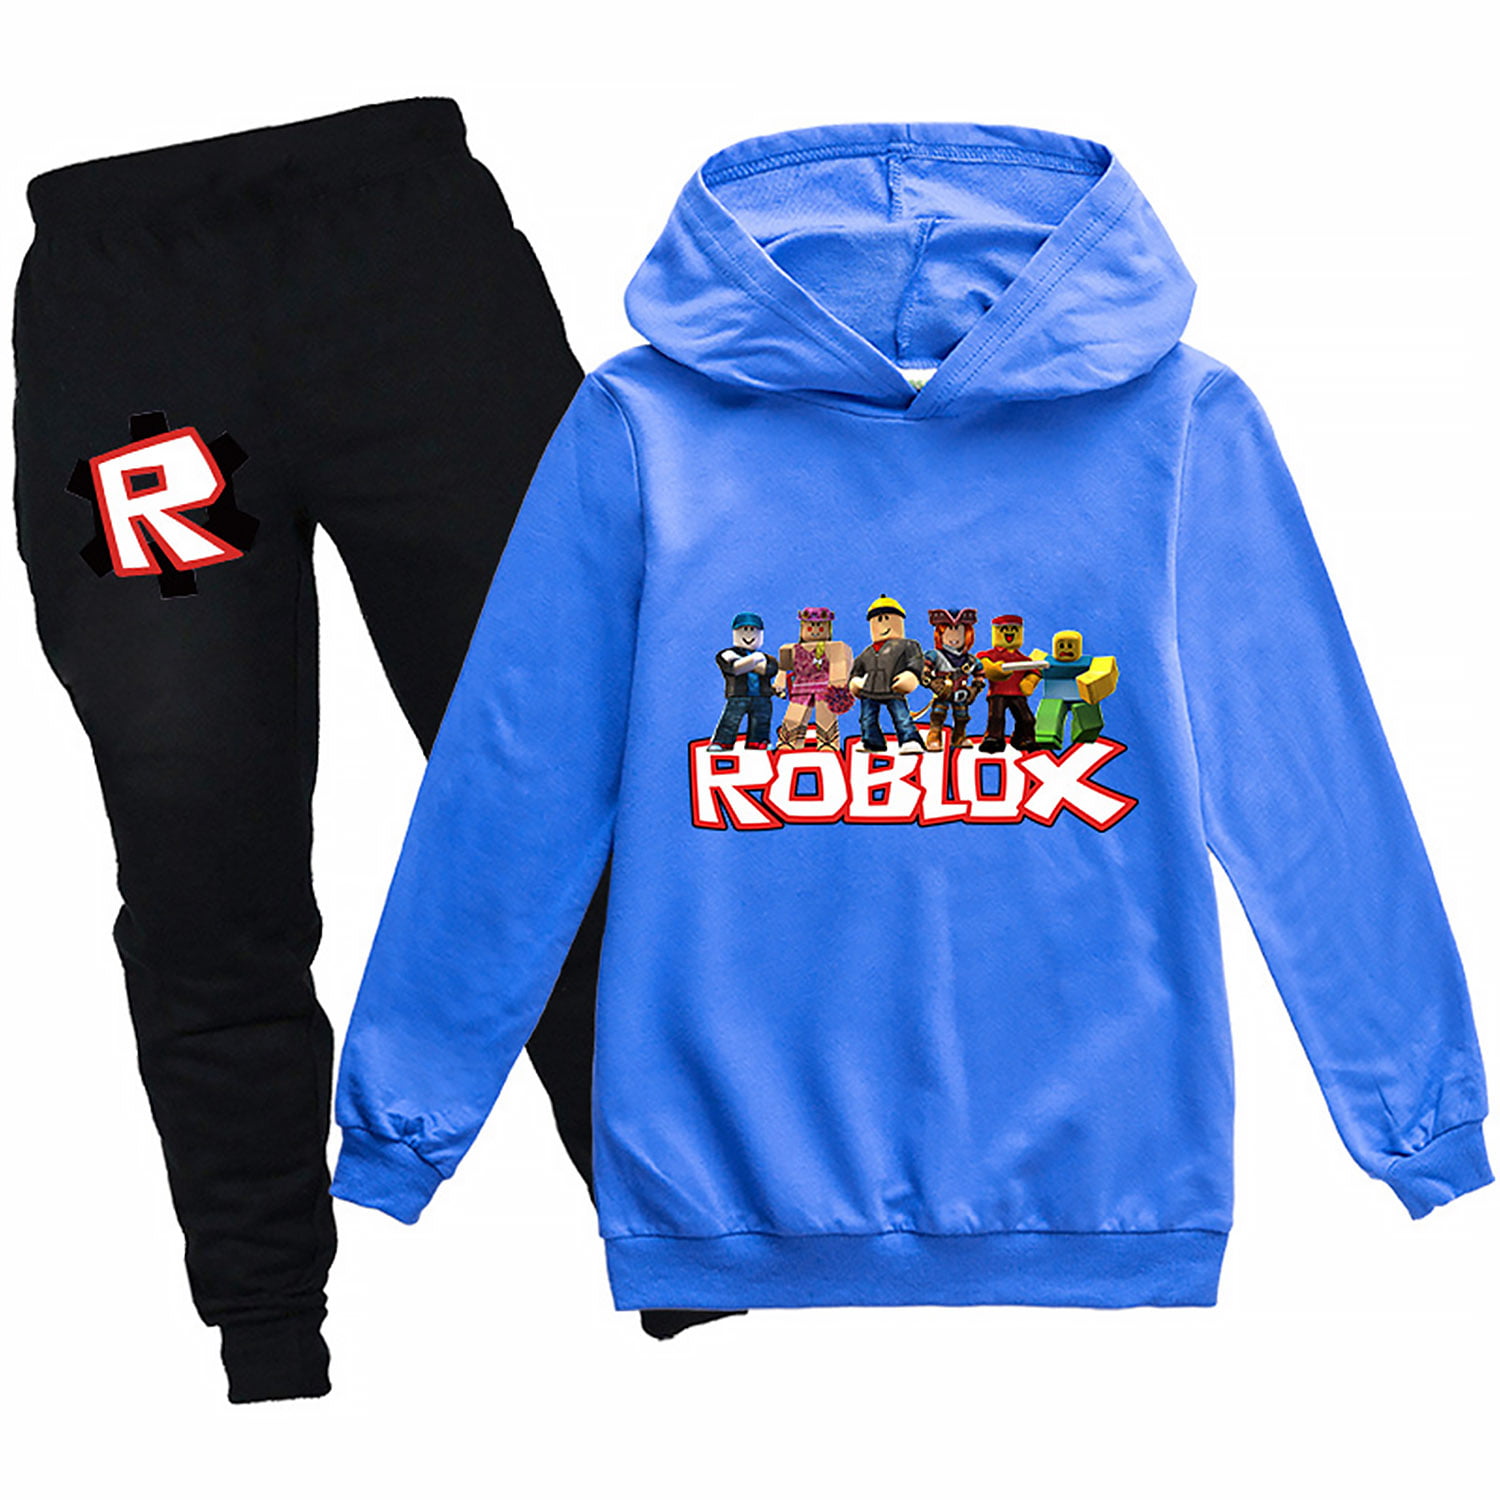 Youth Boys Girls R-OBLOX Pullover Hoodies and Sweatpants Suit for Kids 2 Piece Outfit Fashion Sweatshirt Set 